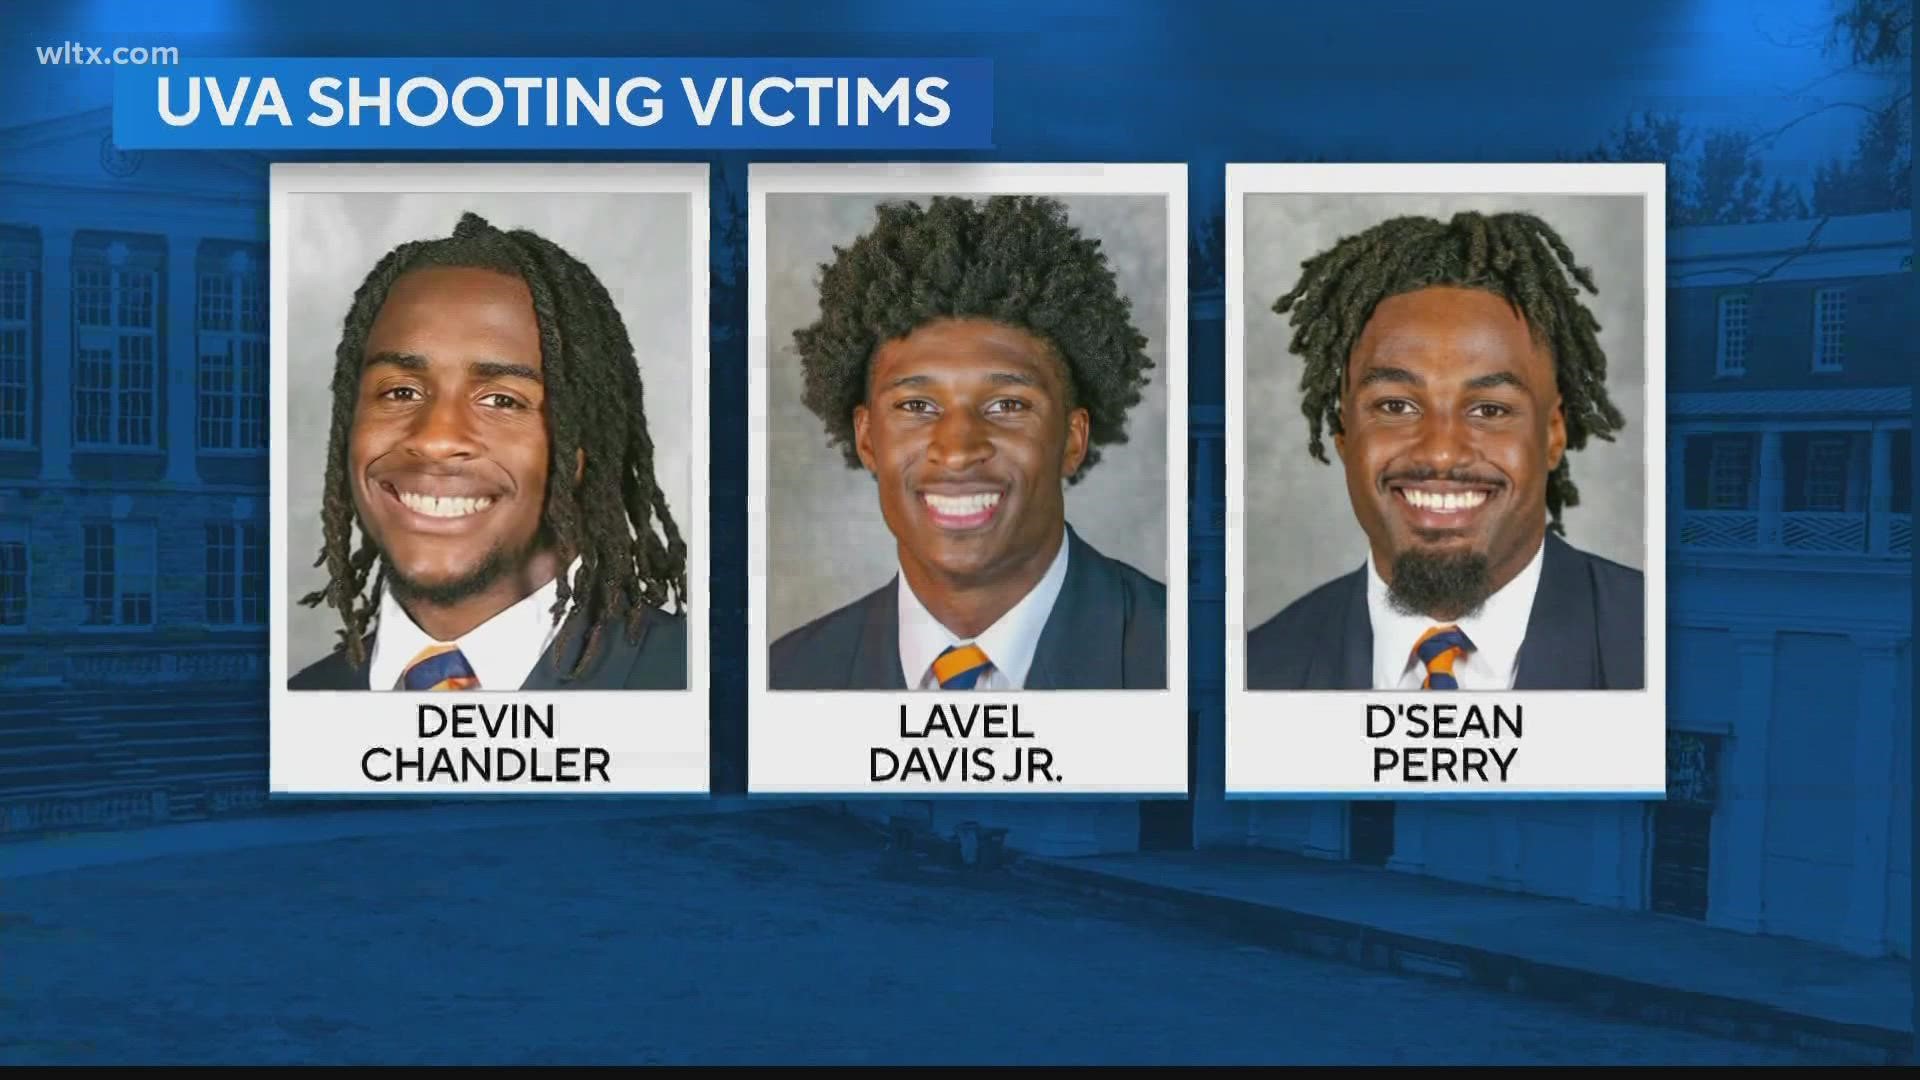 Devin Chandler, Lavel Davis and D'Sean Perry were shot and killed by a single gunman at the University of Virginia in on Sunday night. Davis was from SC.